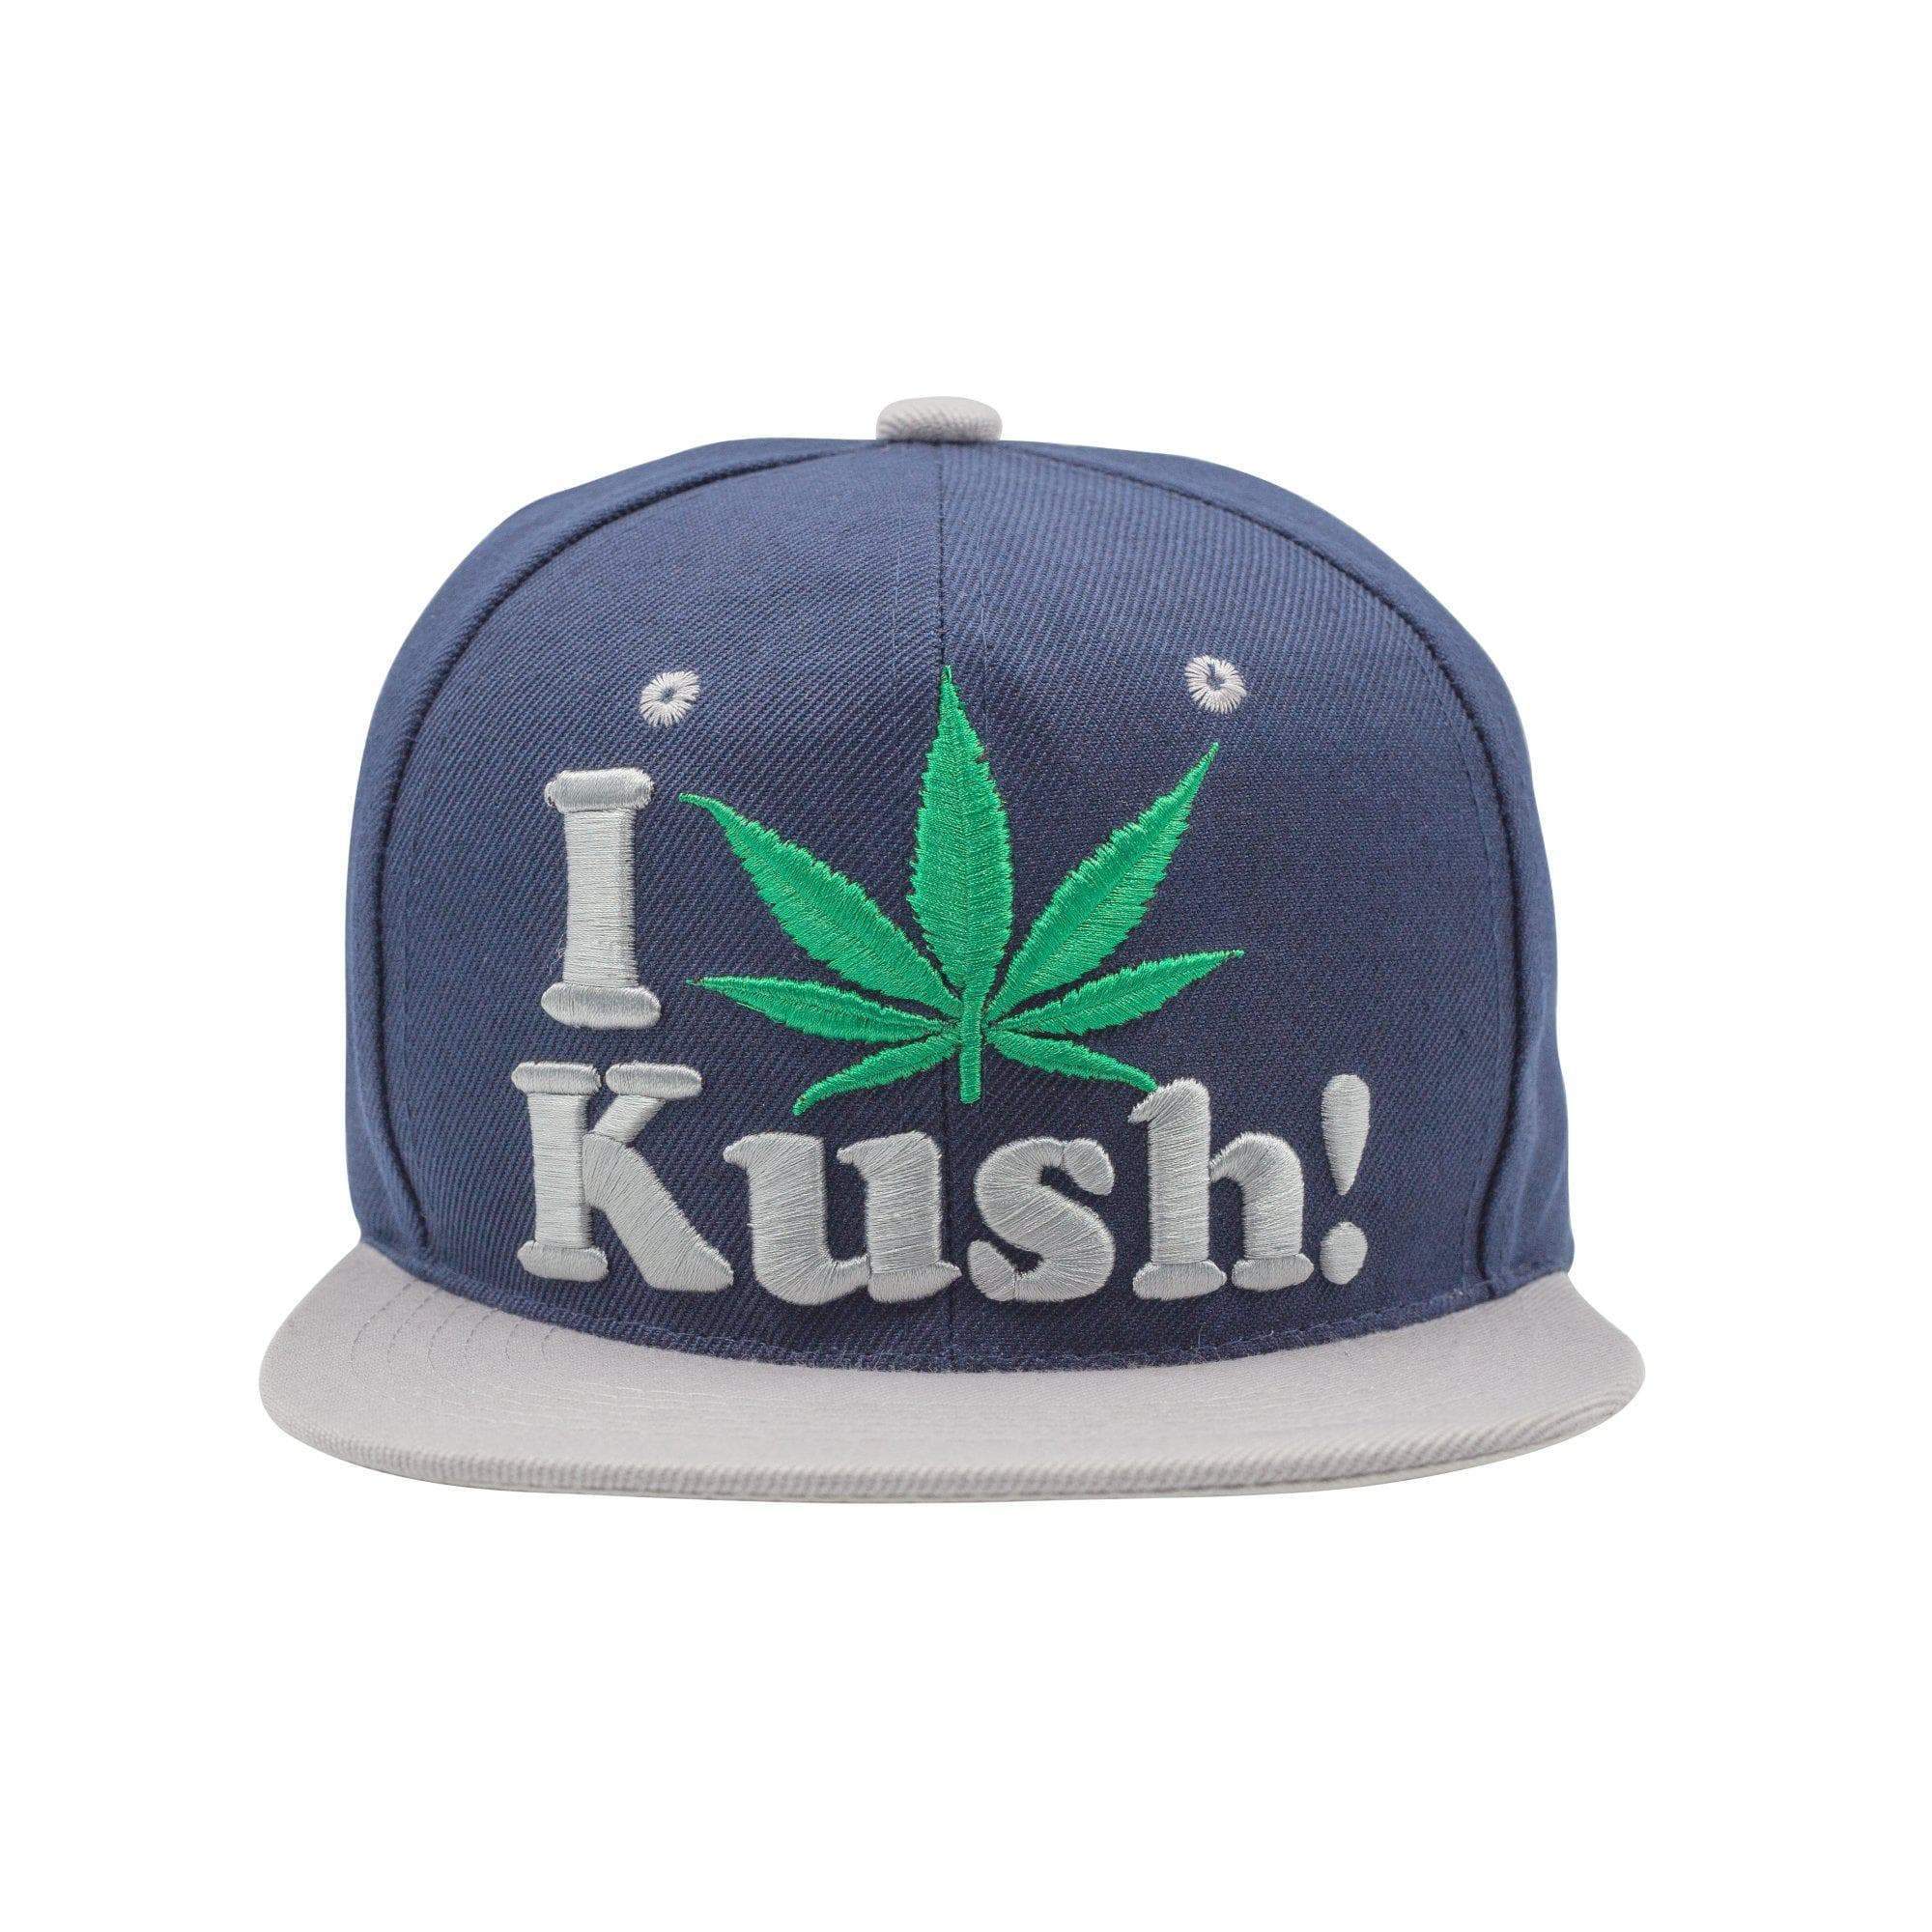 Dope snapback cap fashion item apparel I Love Weed wording beside a weed leef pot design in Blue and White